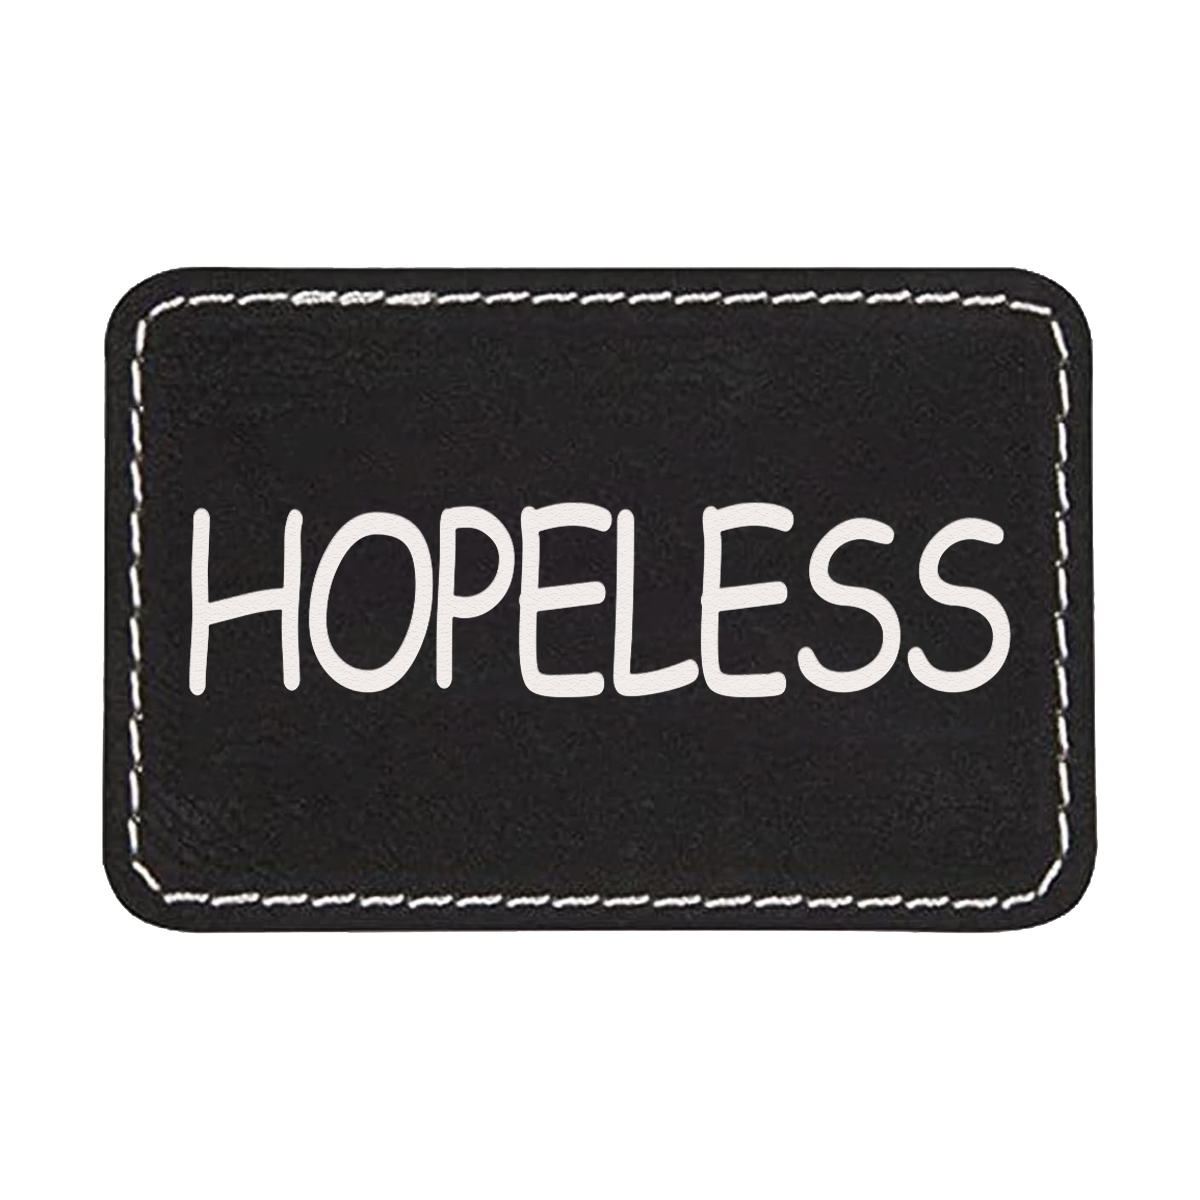 Hopeless Engraved Patch